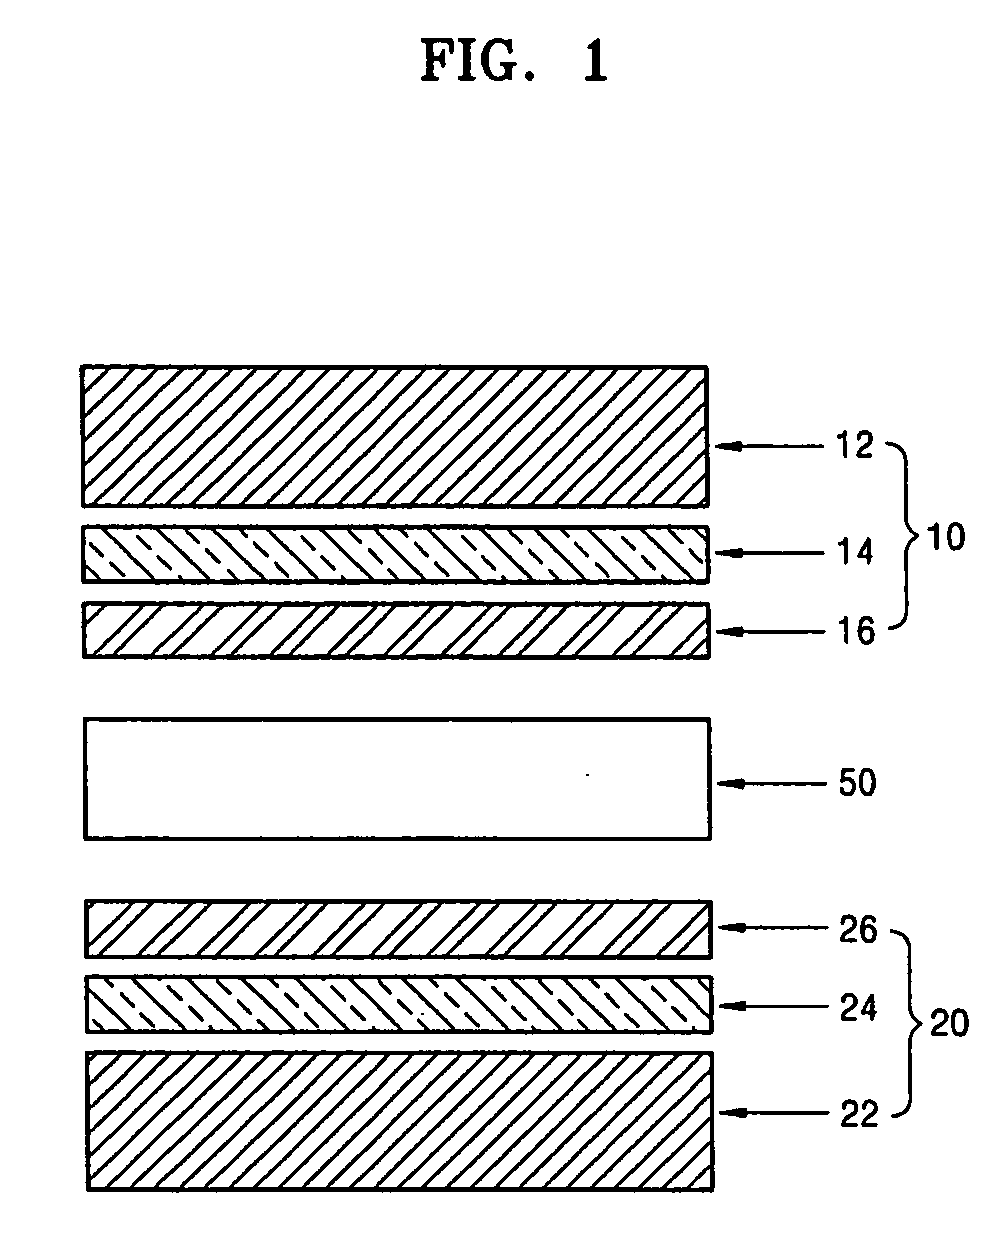 Membrane electrode assembly for fuel cell, method of preparing the same, and fuel cell using the membrane electrode assembly for fuel cell